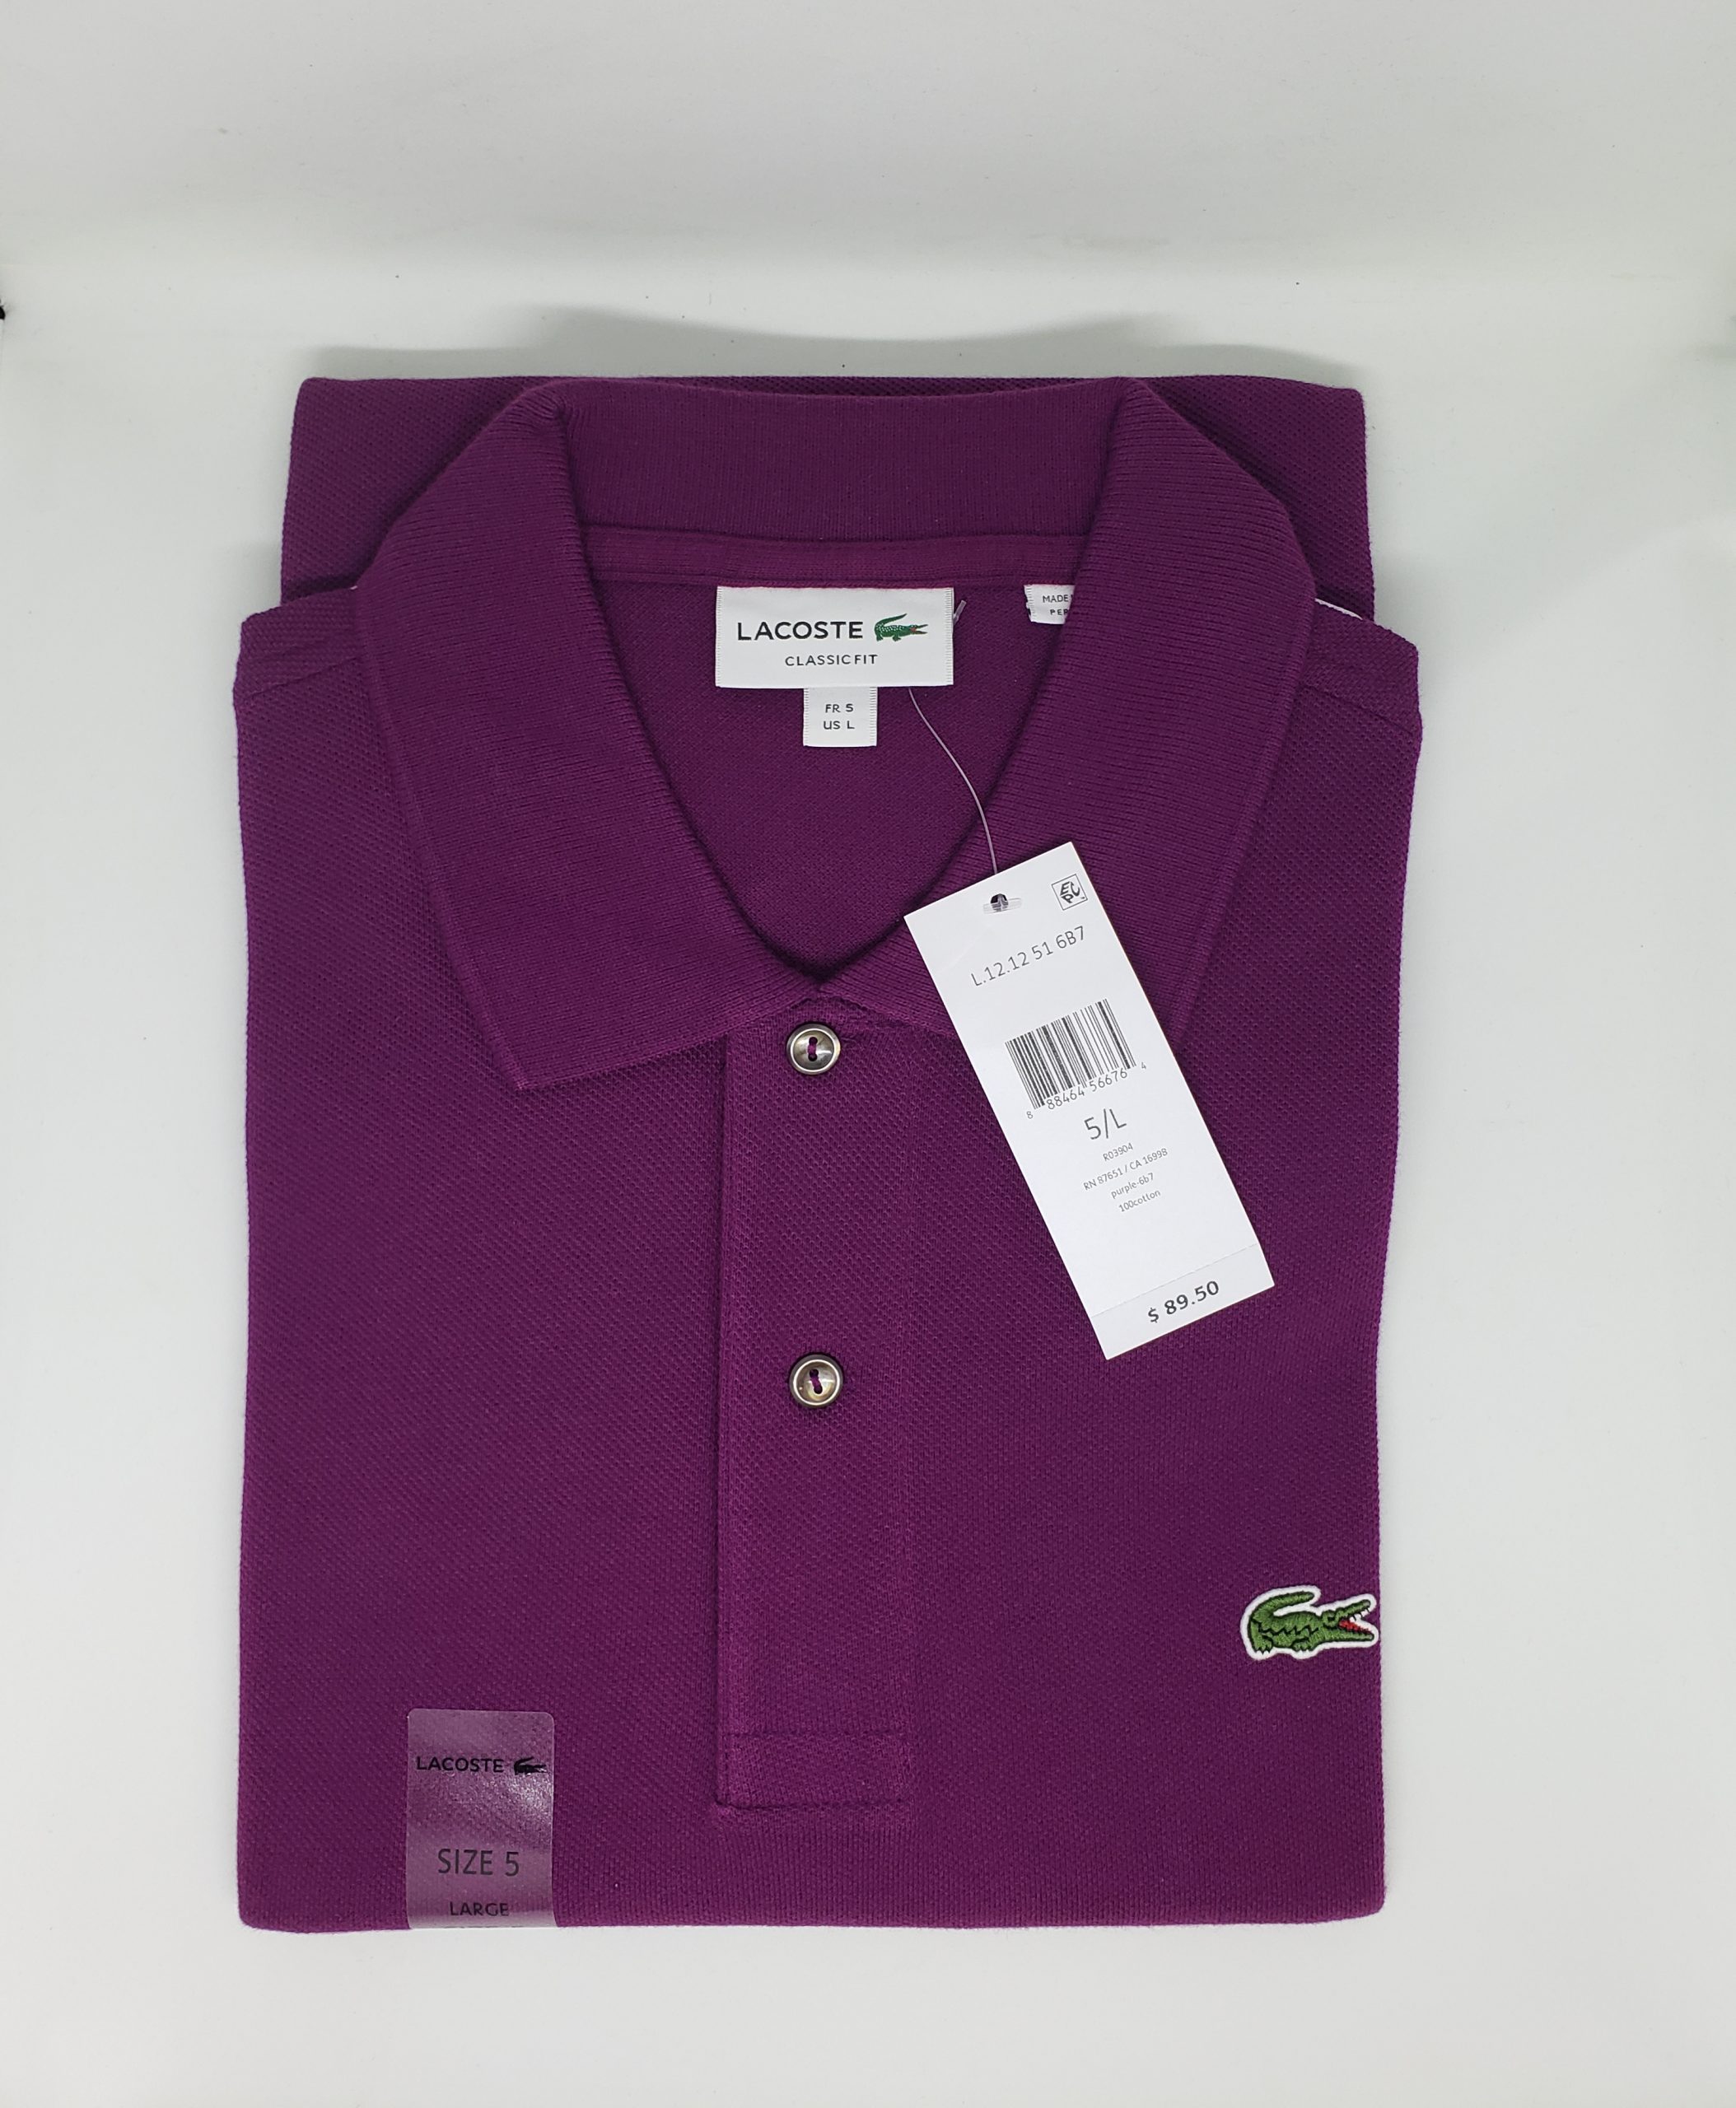 Lacoste Clasic Fit Shirts 100% cotton. SNSGIFTS4ALL